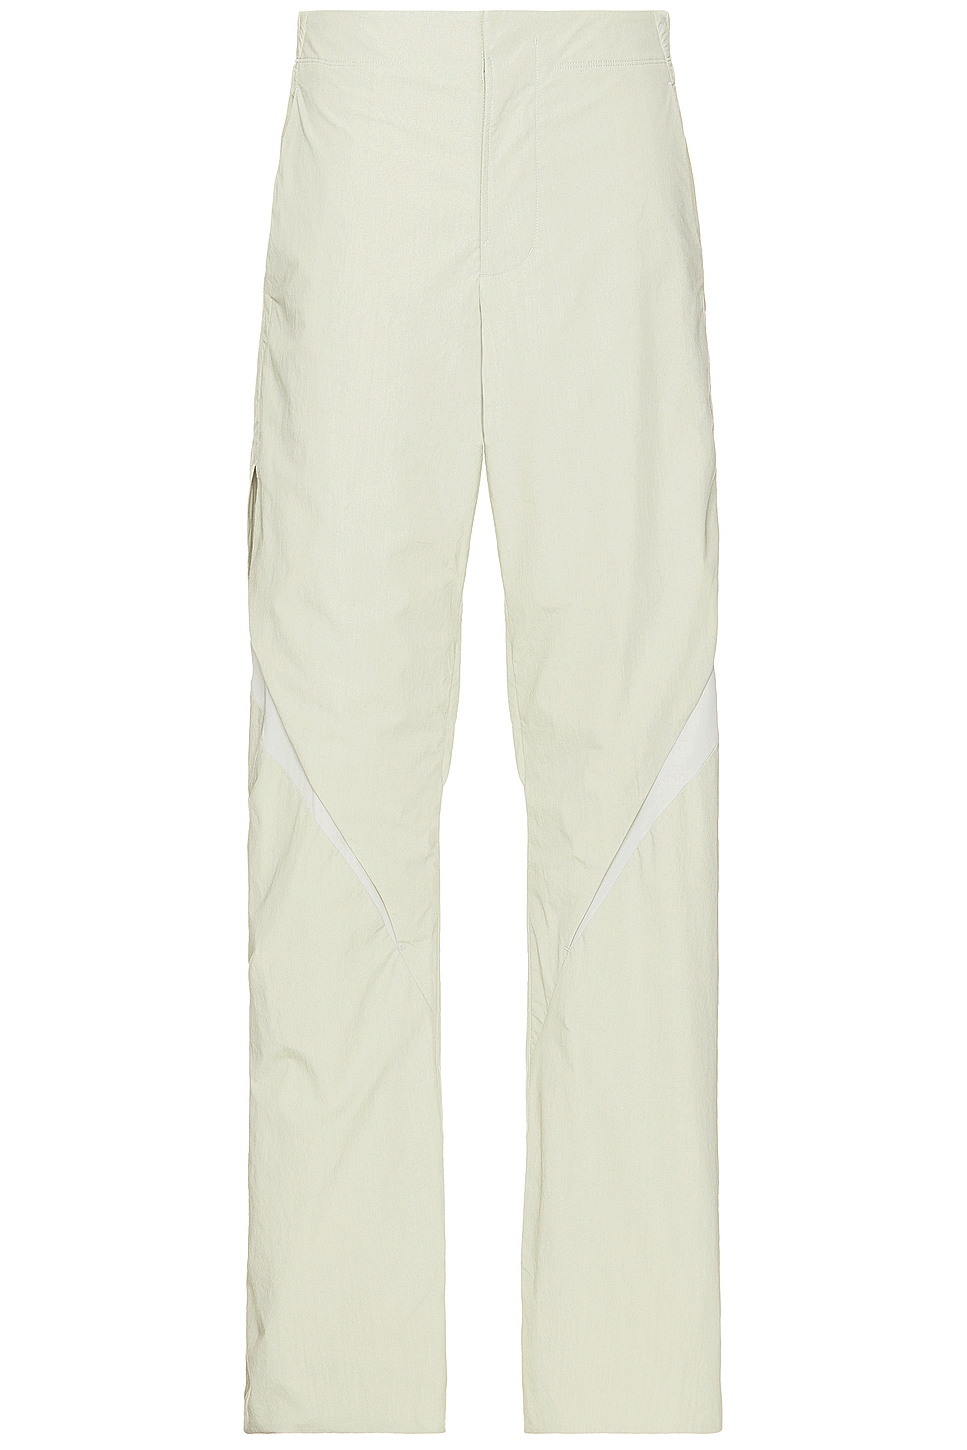 Image 1 of POST ARCHIVE FACTION (PAF) 6.0 Technical Pants in Warm Grey